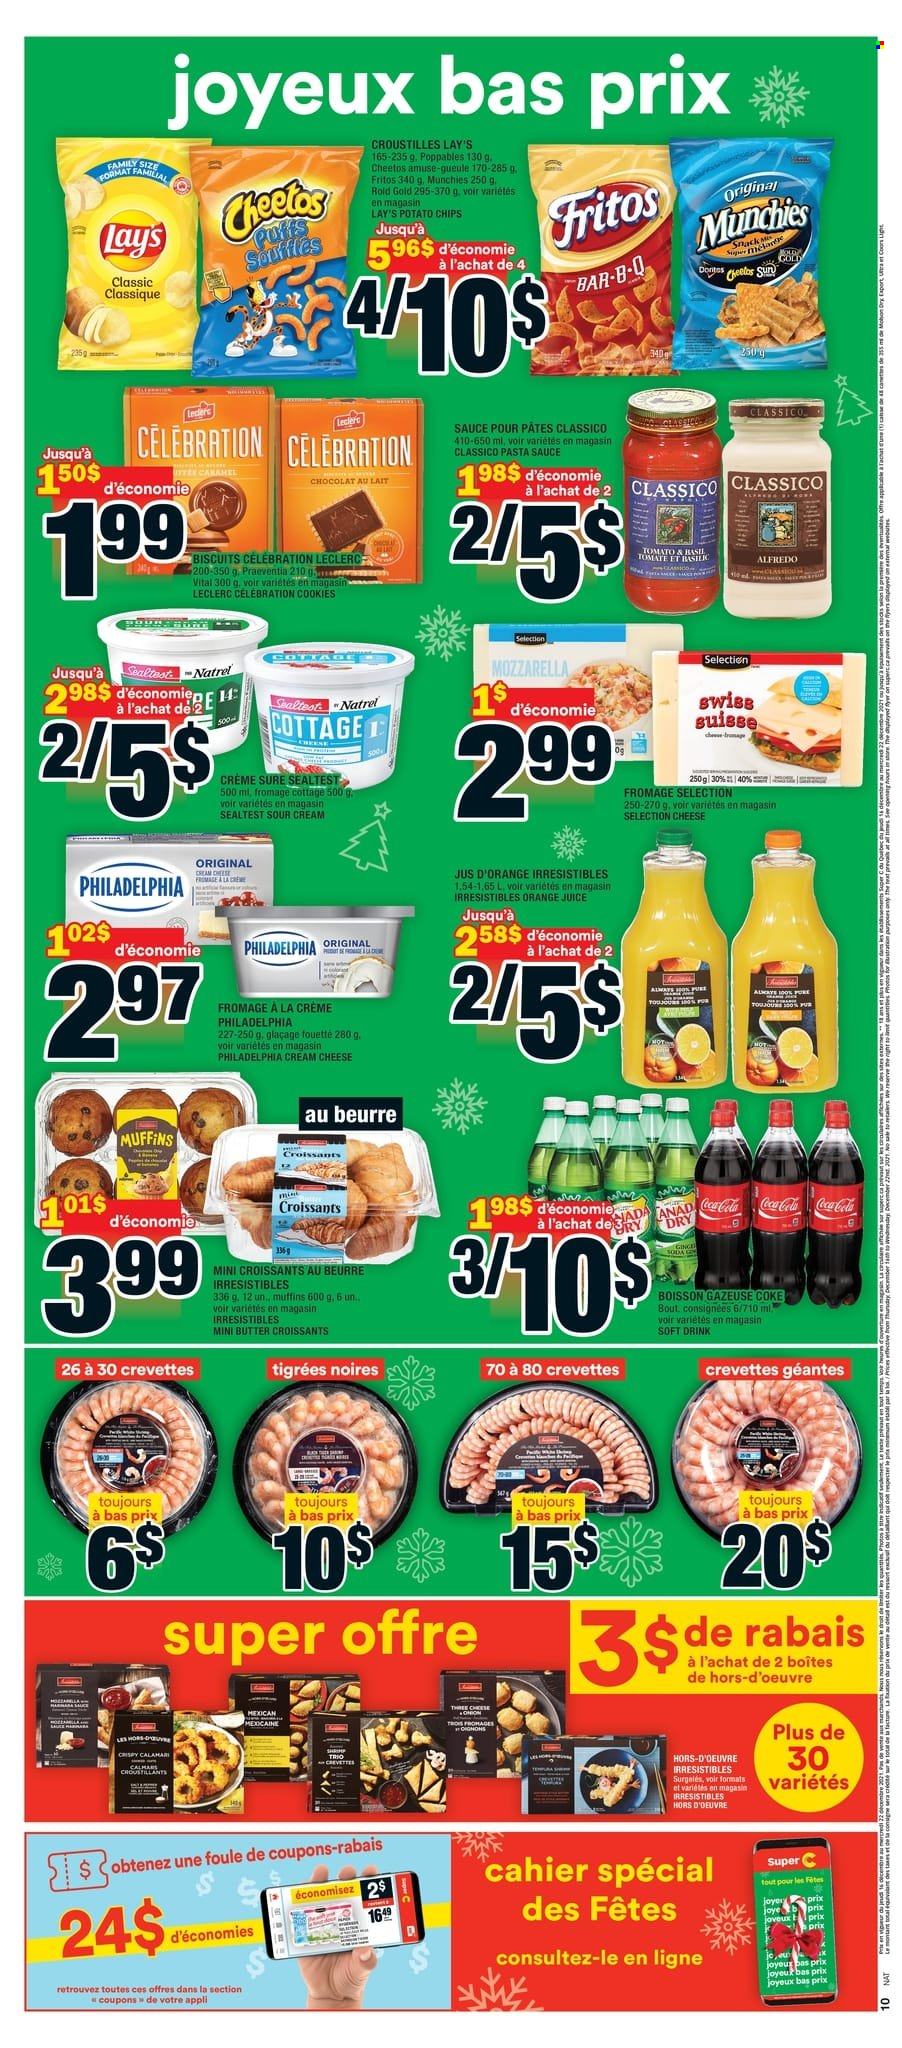 thumbnail - Super C Flyer - December 16, 2021 - December 22, 2021 - Sales products - croissant, puffs, muffin, pasta sauce, sauce, cream cheese, cheese, sour cream, cookies, snack, Celebration, biscuit, Fritos, potato chips, Cheetos, Lay’s, Classico, Coca-Cola, orange juice, juice, Sure, mozzarella, Philadelphia, chips. Page 2.